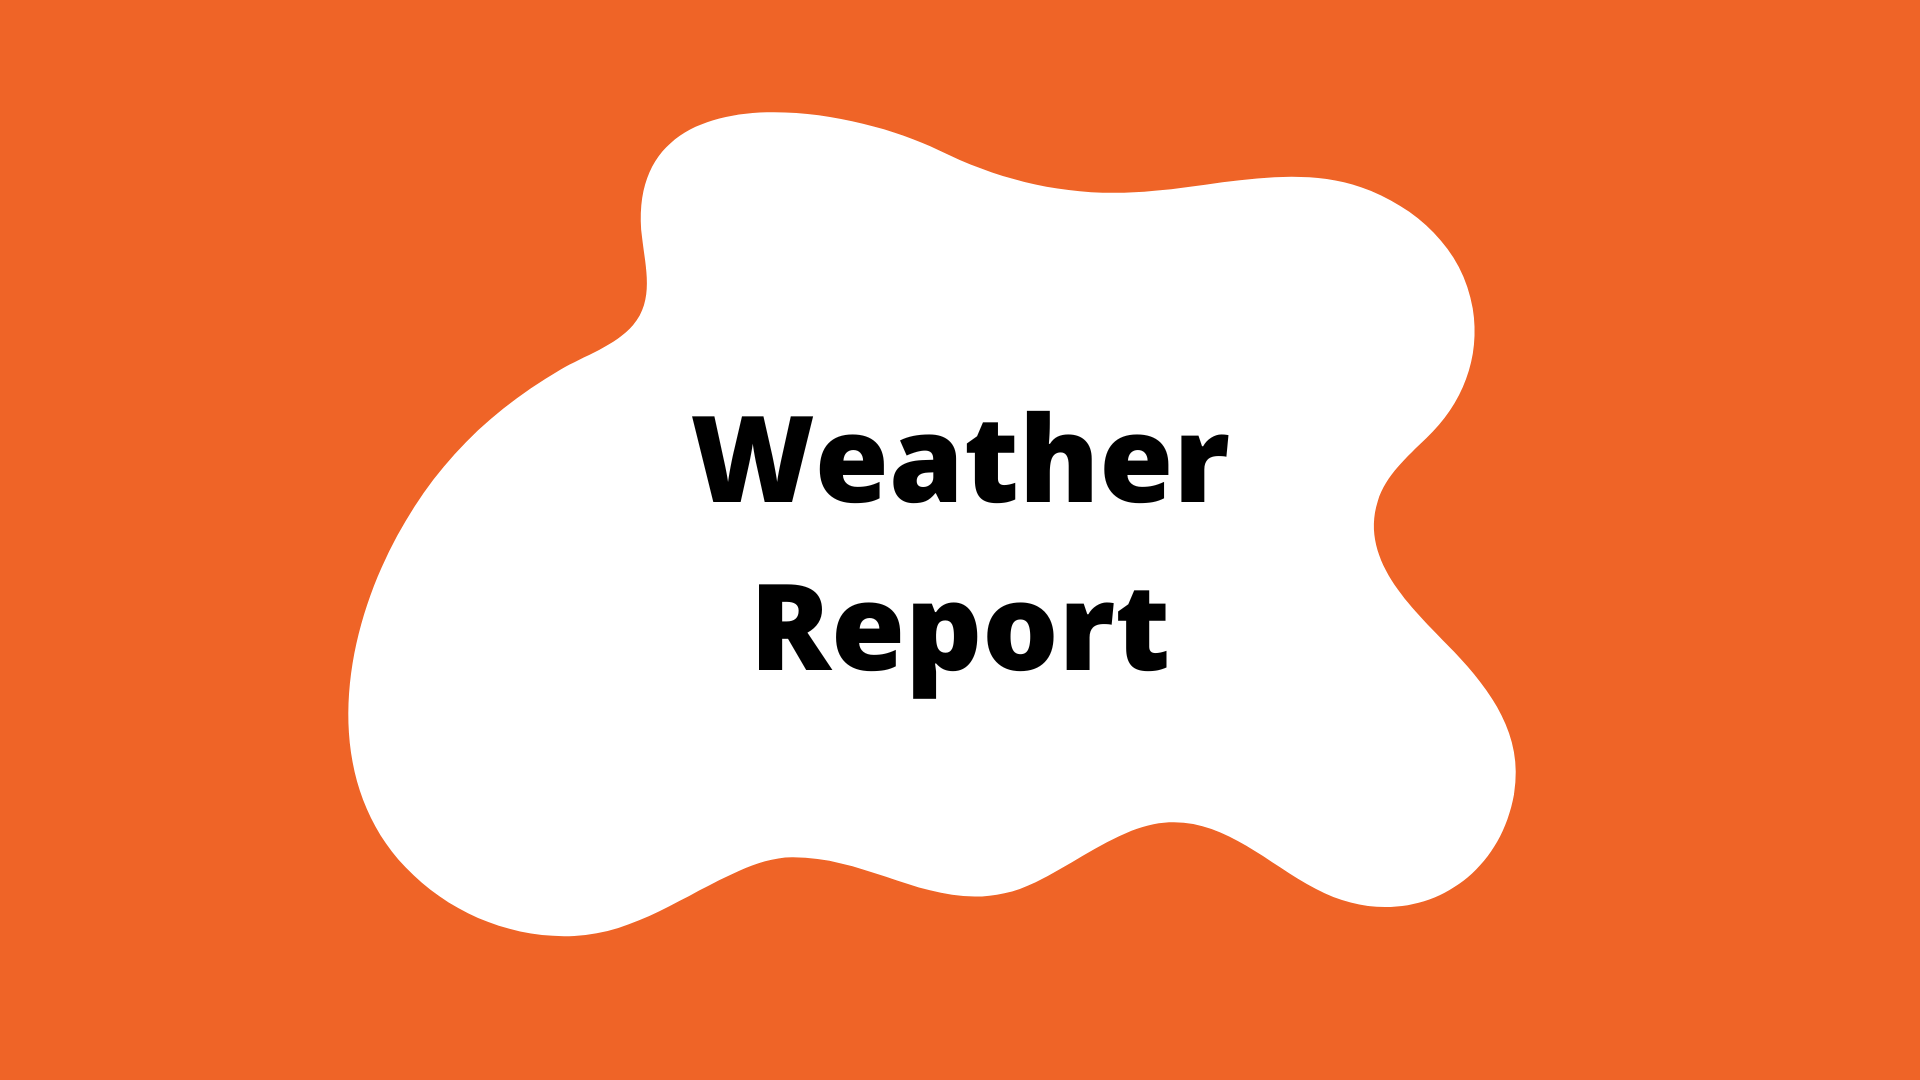 "Weather Report" activity button. An orange square with a white blob in the center. The title is in the blob.